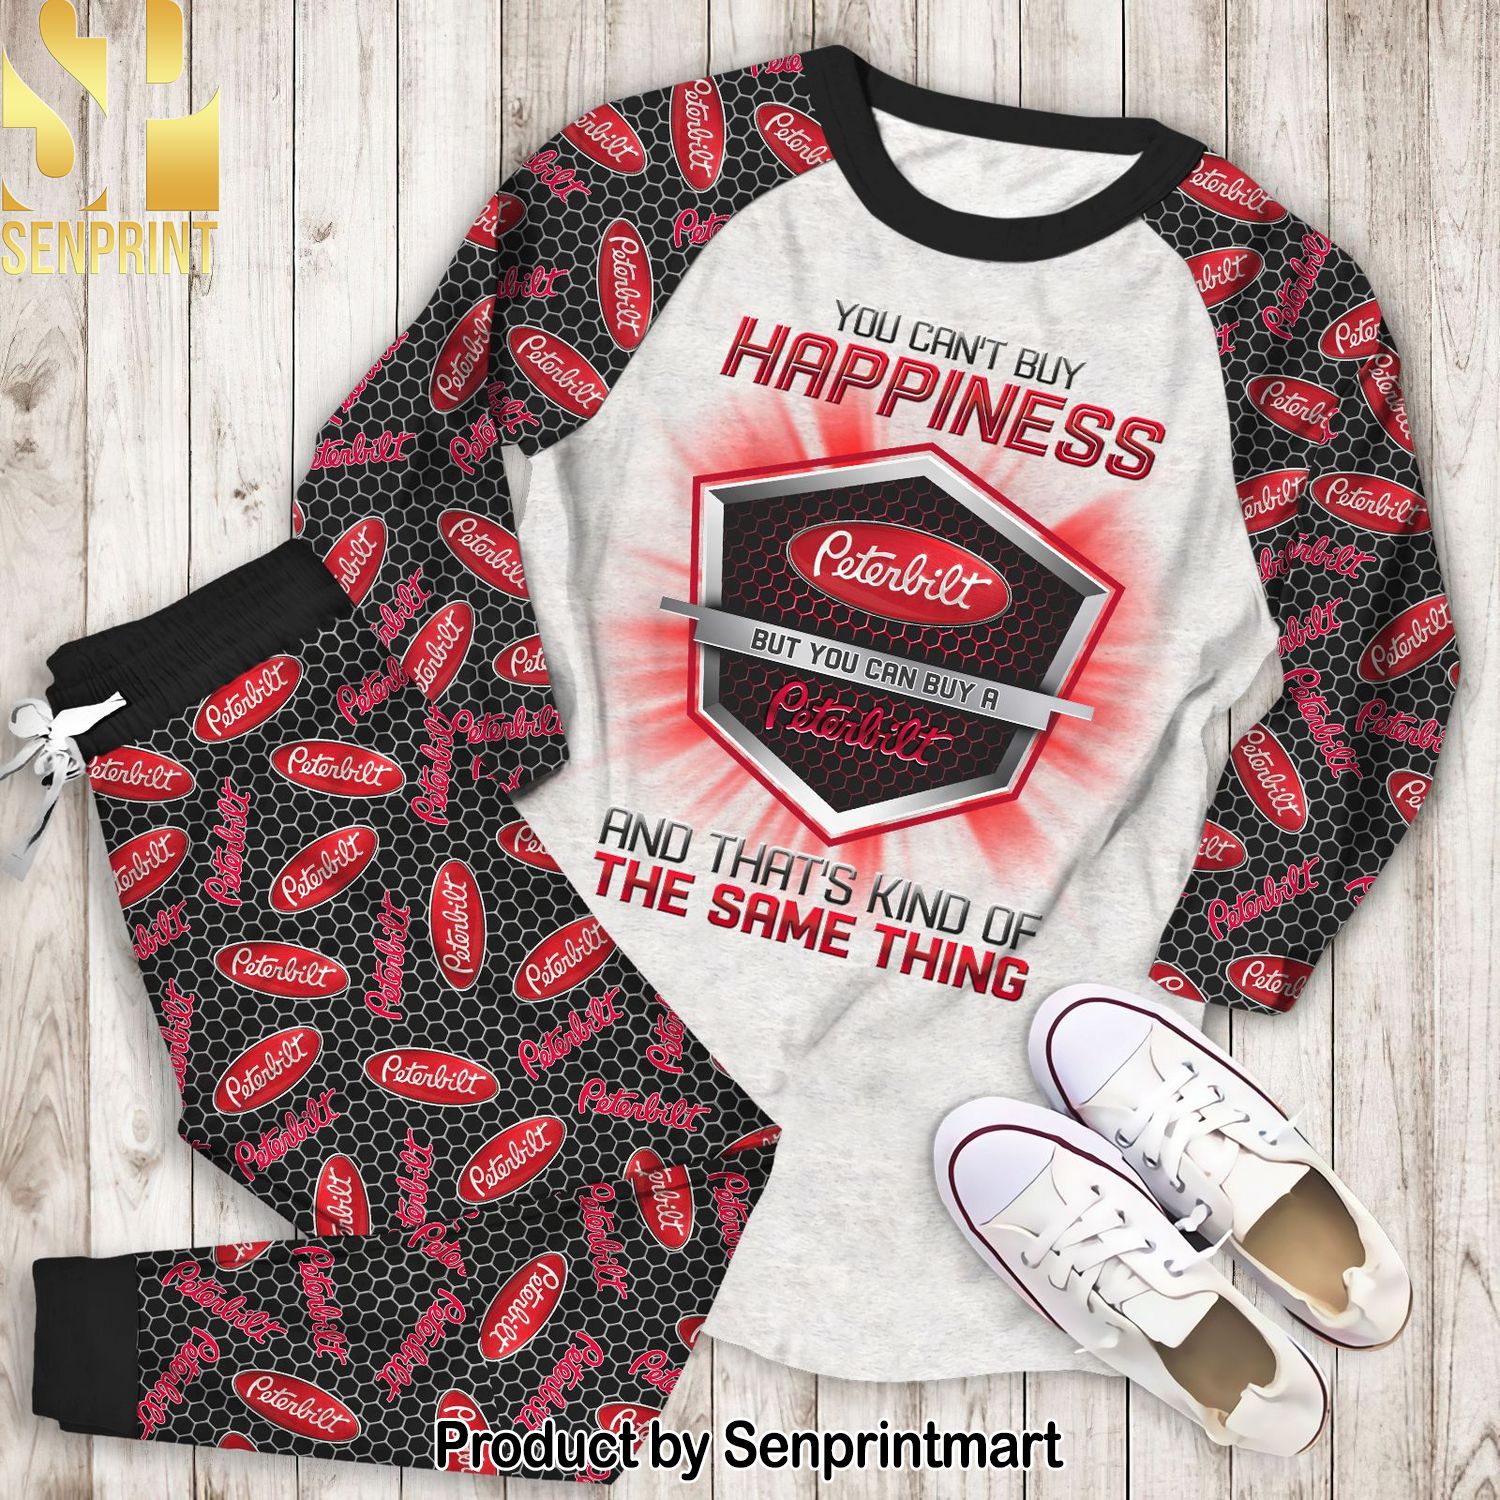 You Can’t Buy Happiness But You Can Buy a Peterbilt Classic Pajamas Set